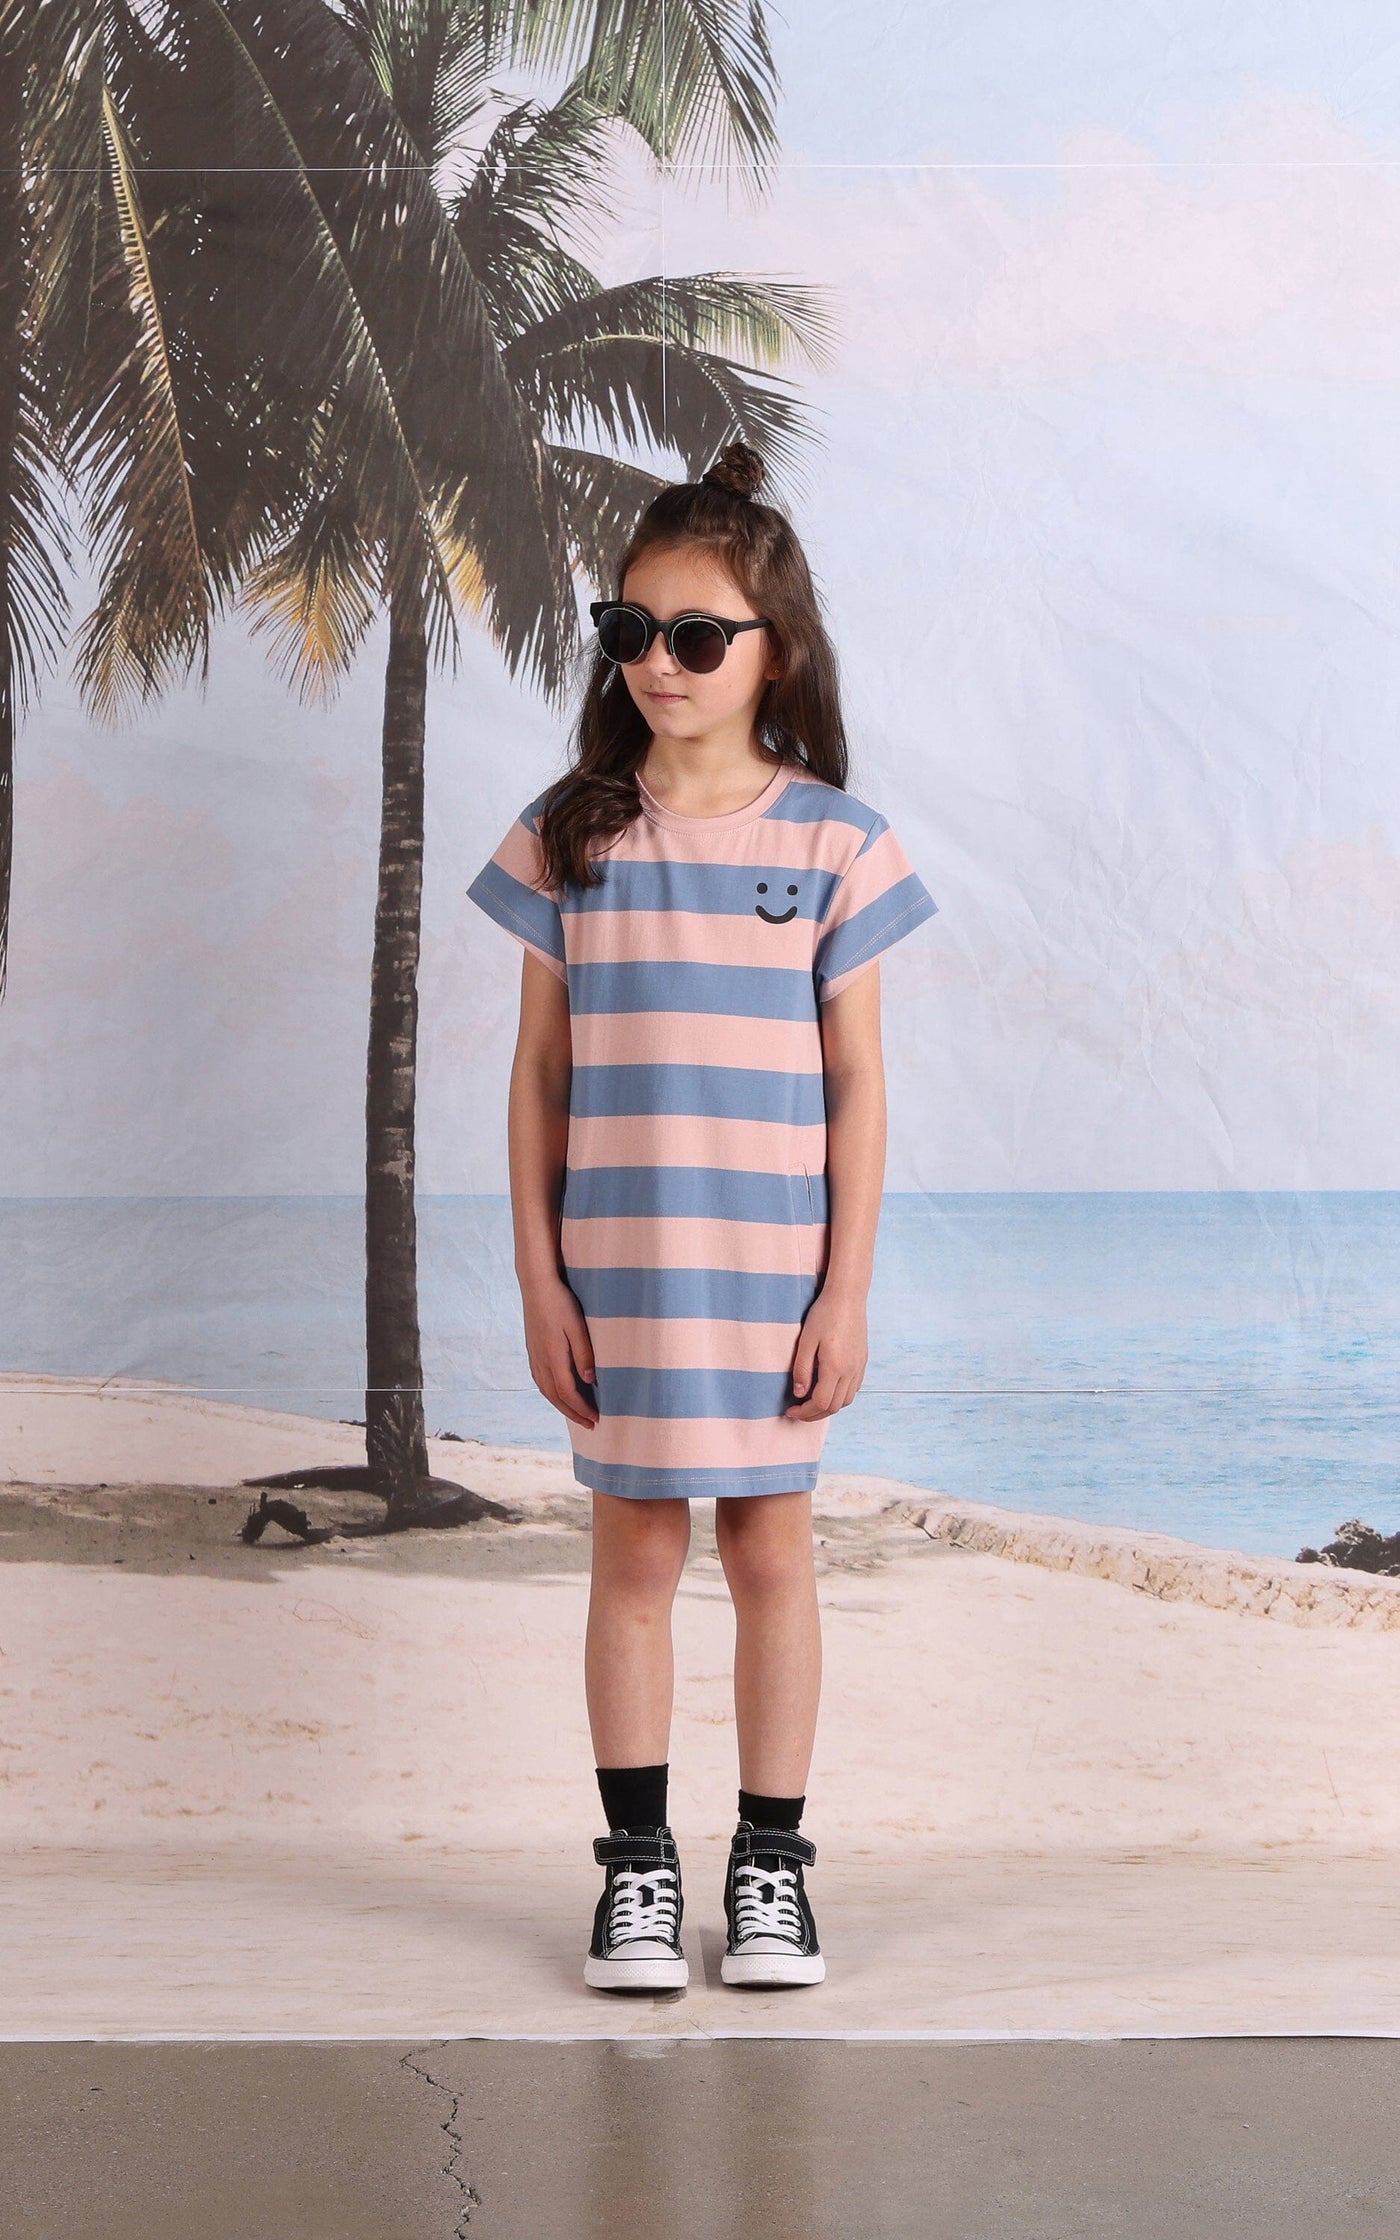 PREORDER Minti Happy Face Tee Dress - Muted Pink/Muted Blue Short Sleeve Dress Minti 